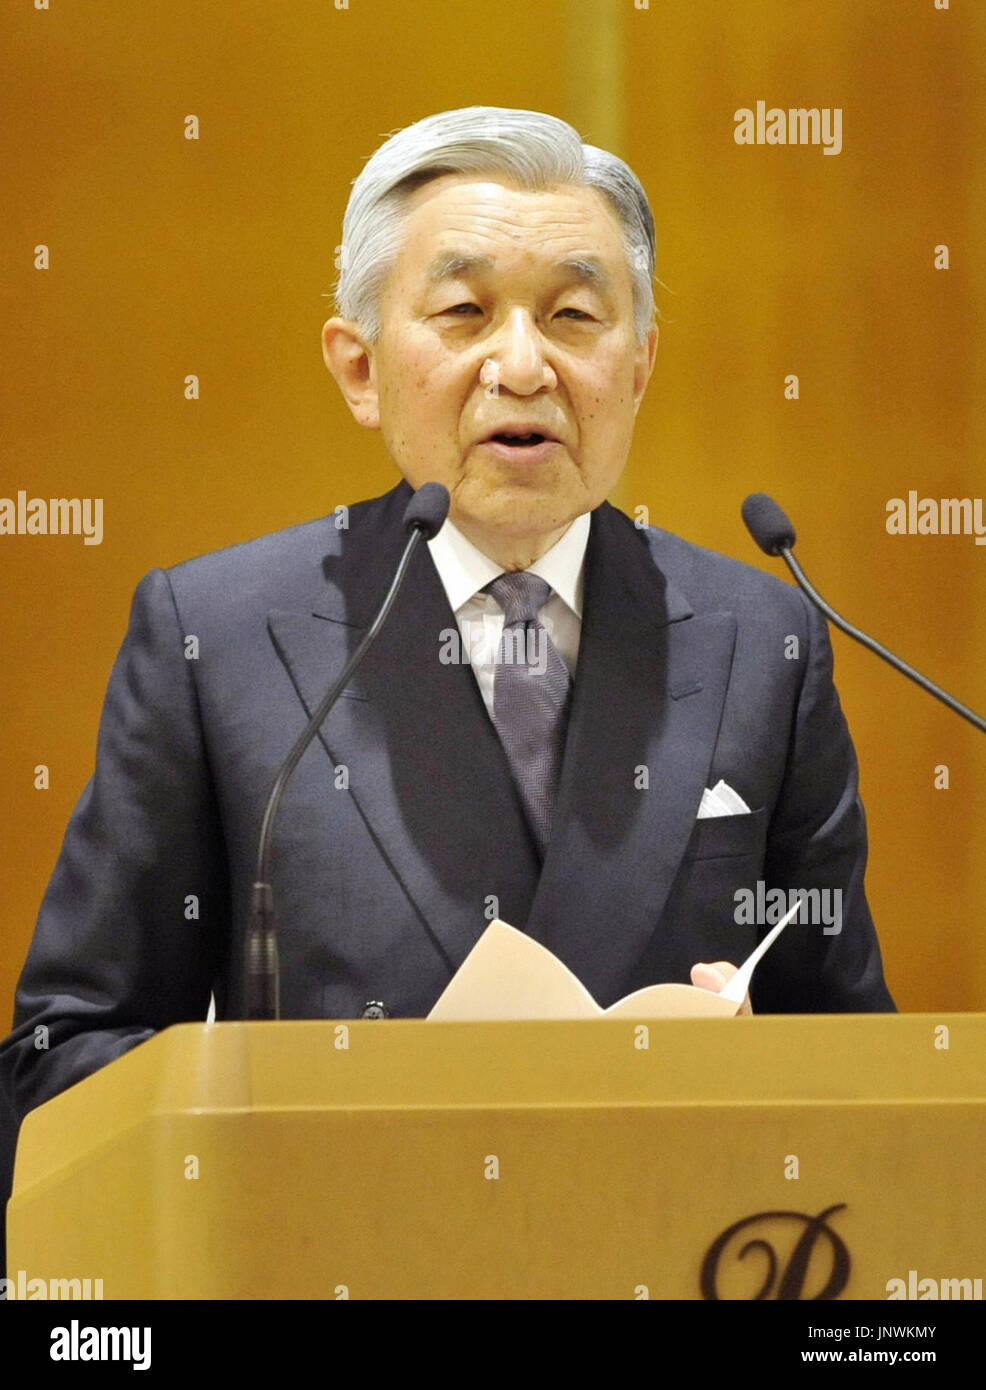 TOKYO, Japan - Japanese Emperor Akihito speaks at a ceremony to commemorate the 100th anniversary of the Japan Sports Association and the Japanese Olympic Committee in Tokyo on July 16, 2011. (Kyodo) Stock Photo